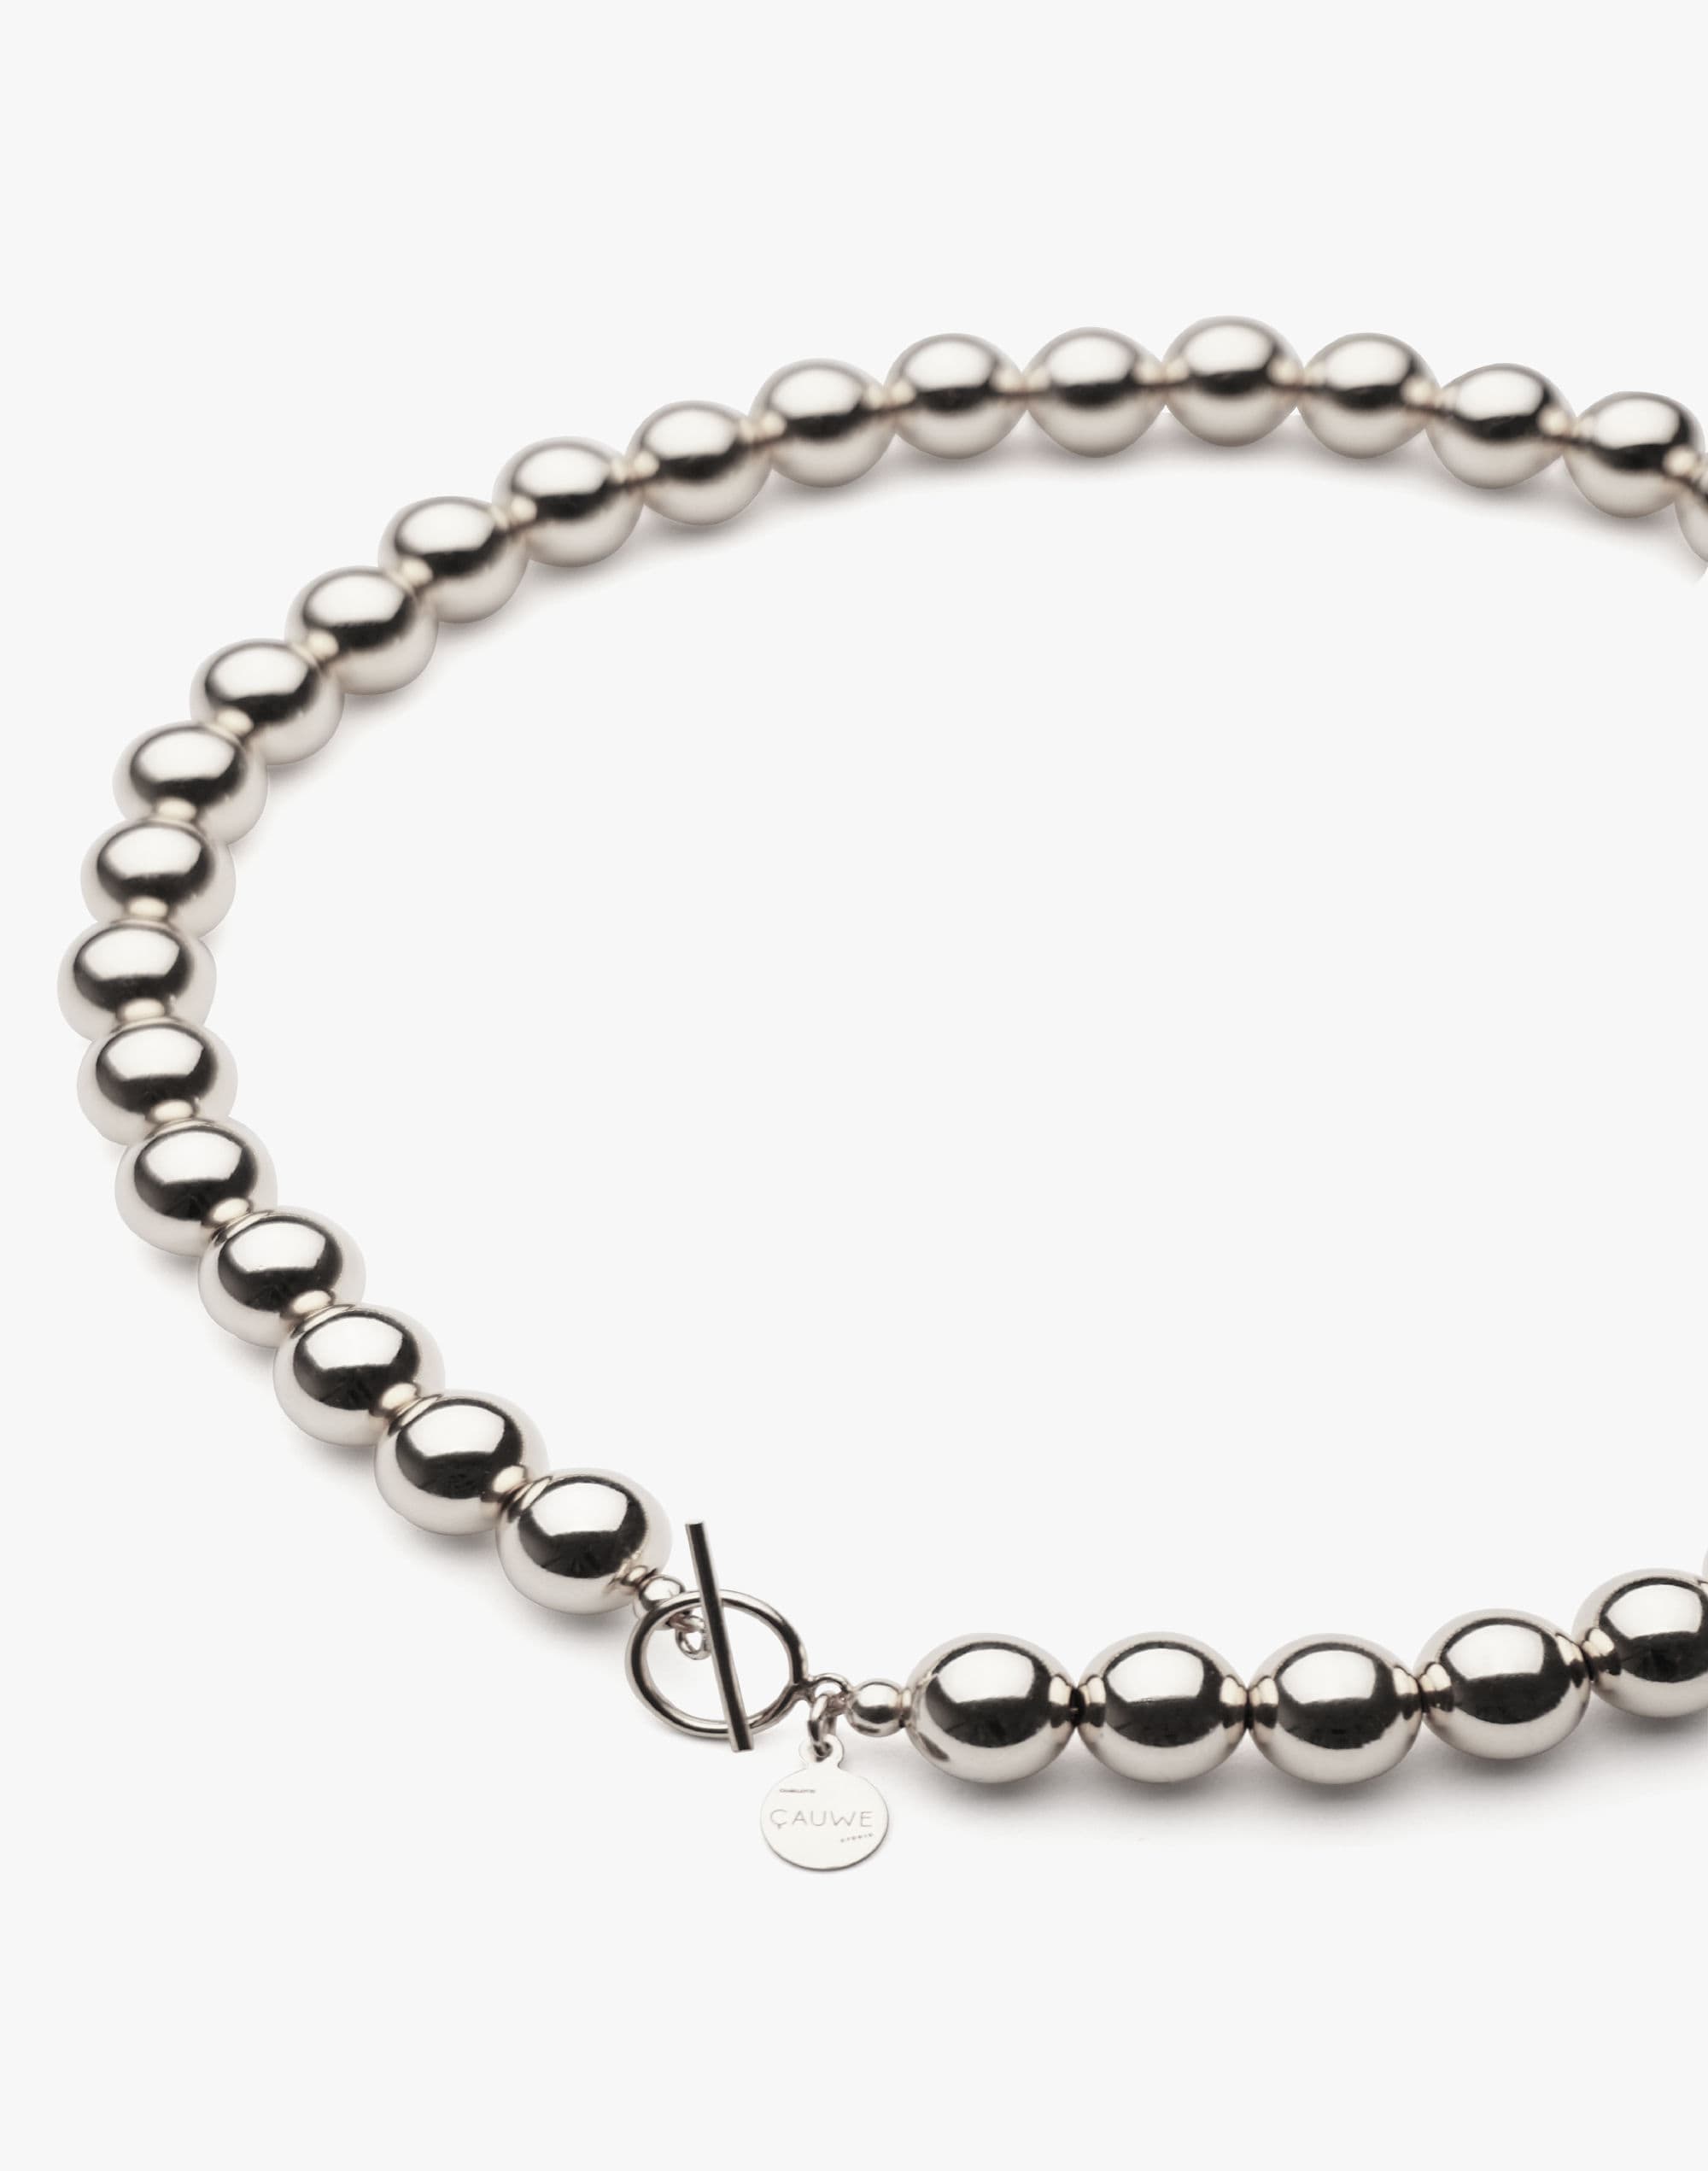 Charlotte Cauwe Studio Bead Necklace in Sterling Silver 10mm